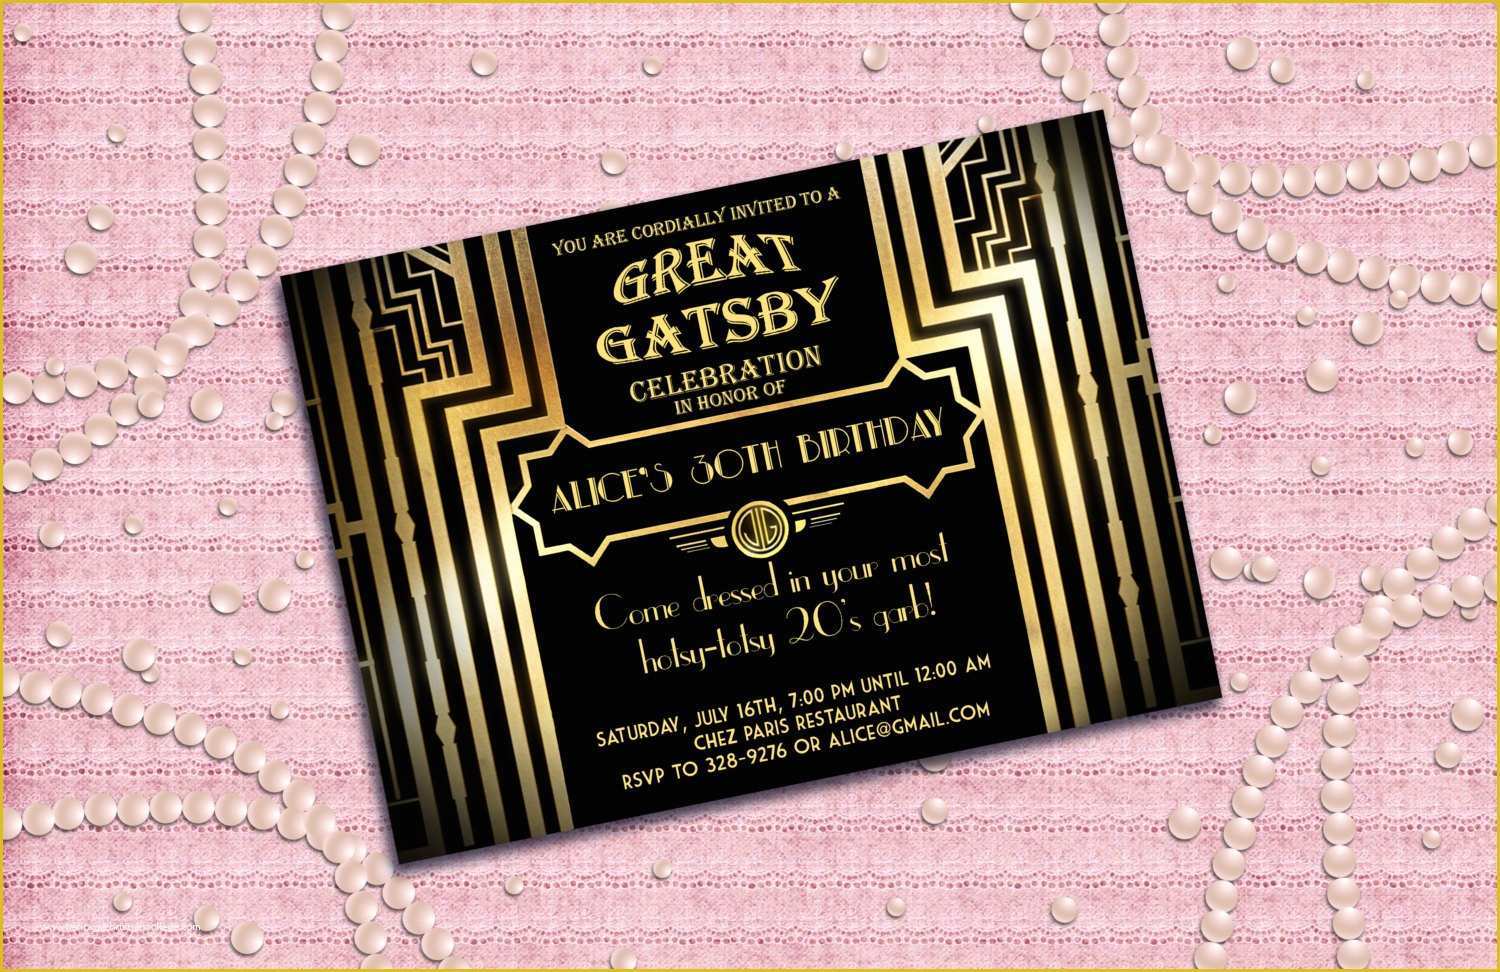 1920s Party Invitation Template Free Of 1920s Party Invites